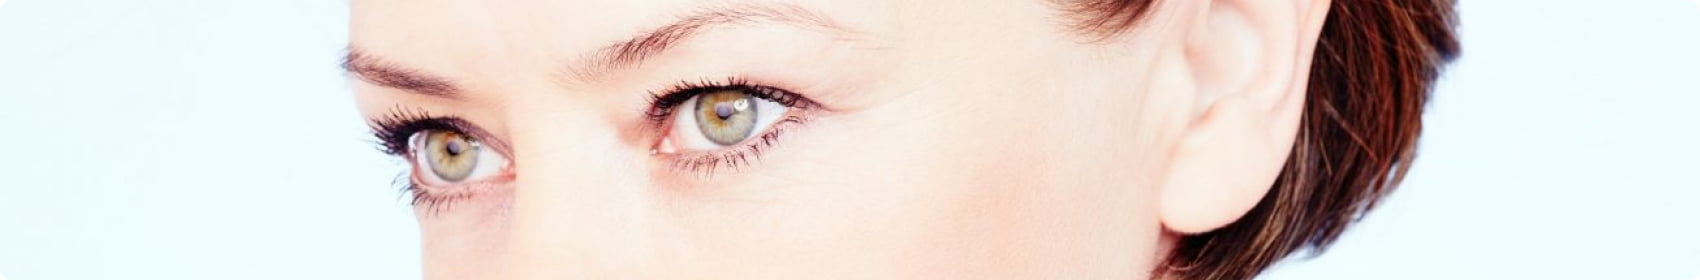 Close-up picture of a woman's eyes